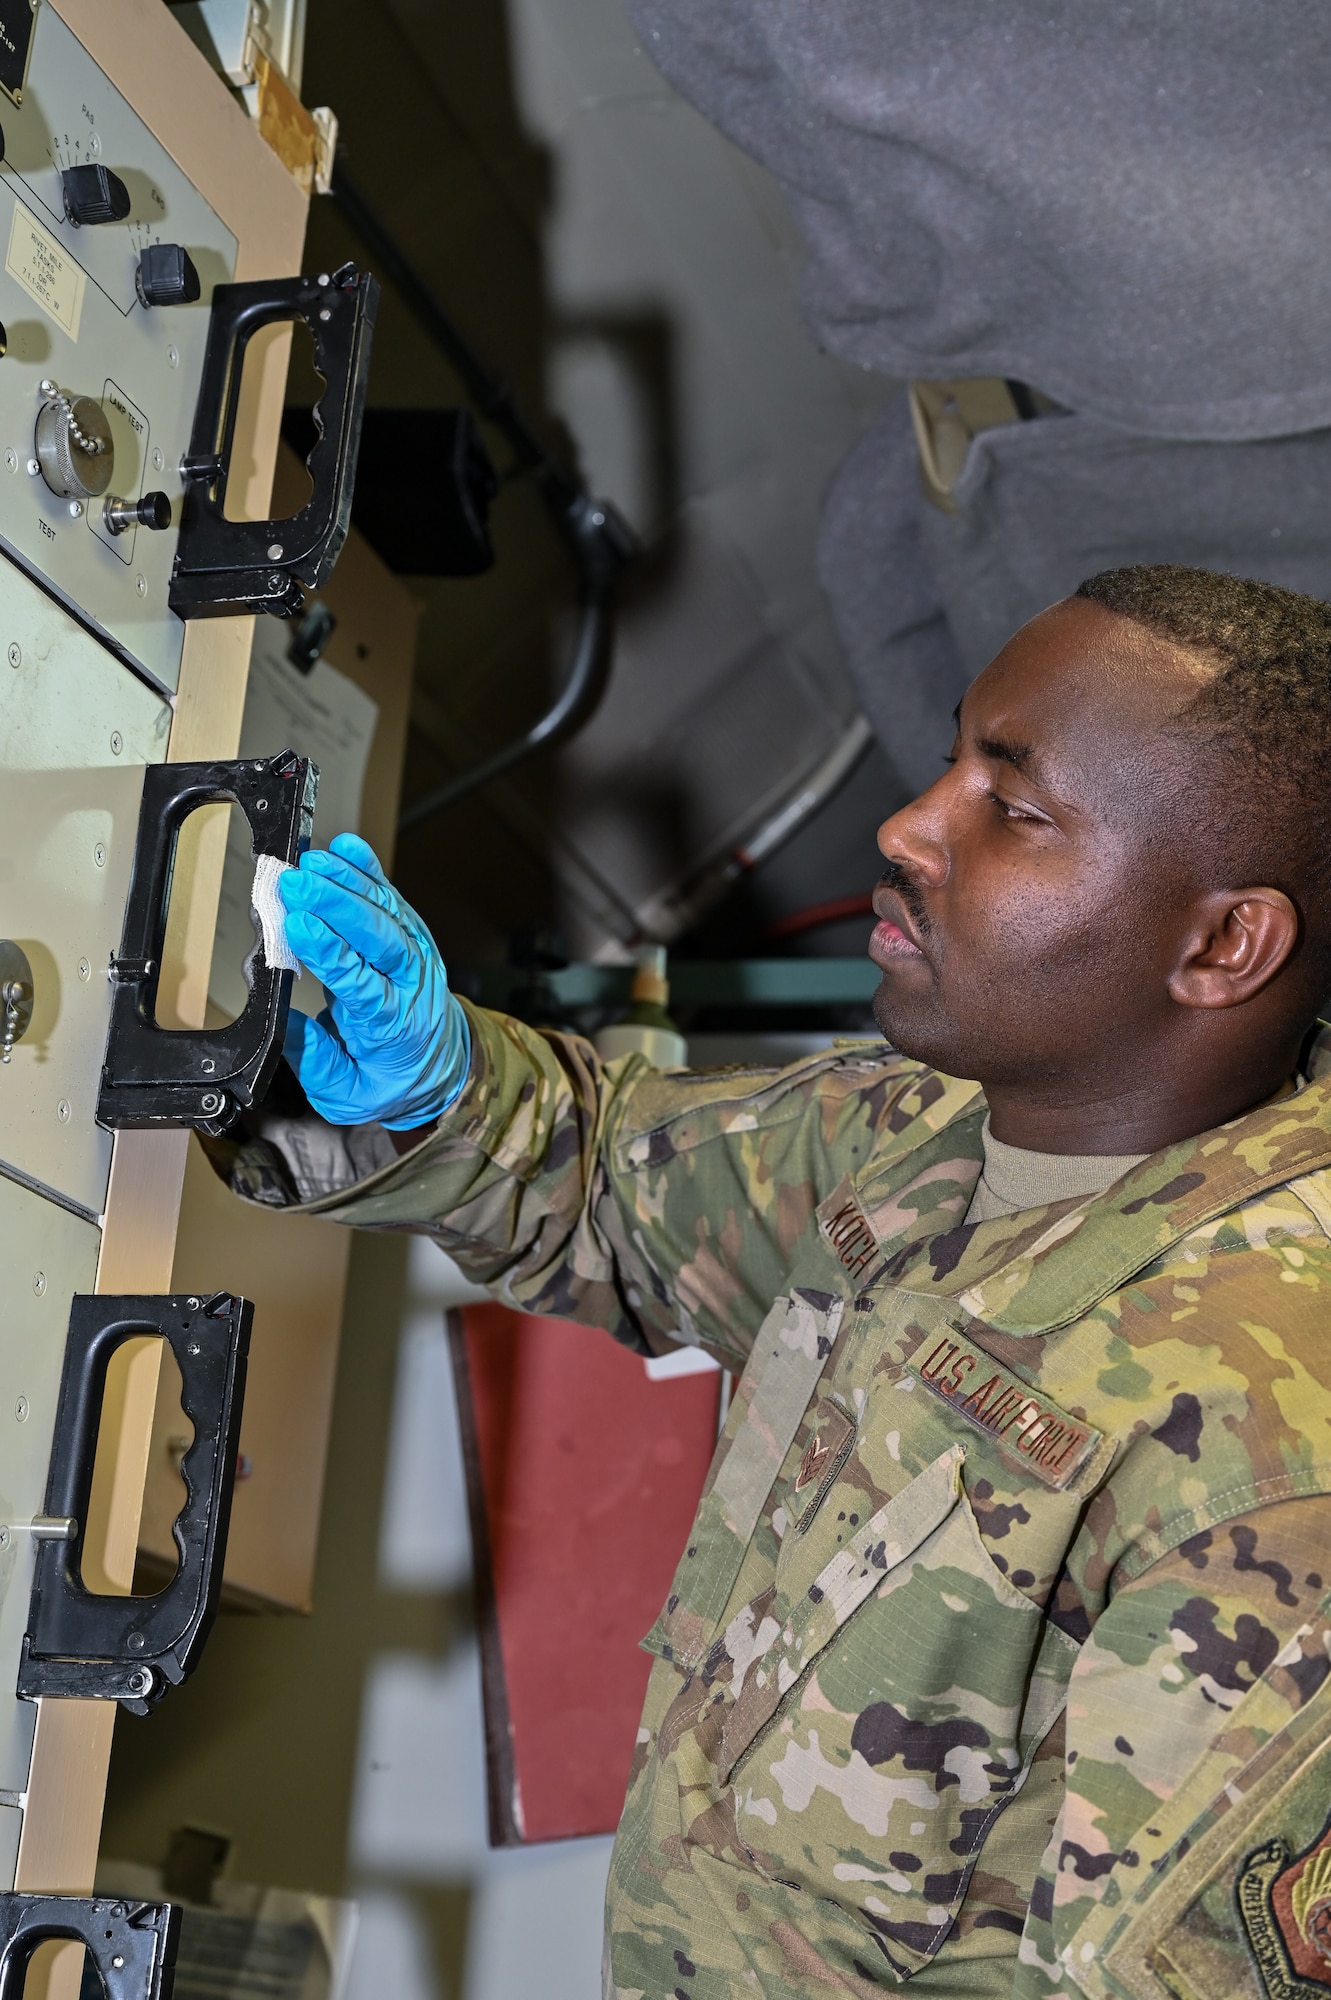 Staff Sgt. Enock Koech, U.S. Air Force School of Aerospace Medicine bioenvironmental
engineer, takes samples at L-01 missile alert facility, or MAF, near Stoneham, Colorado, July 13, 2023. USAFSAM teams visited all of F.E. Warren Air Force Base’s MAFs as part of the ongoing missile community cancer study at all three intercontinental ballistic missile wings in Air Force Global Strike Command. While there, the teams assessed indoor air quality at each facility to include temperature, humidity, carbon dioxide and carbon monoxide levels. They also collected water and soil samples and tested for the presence of radon, polychlorinated biphenyls, organic phosphates and other potential occupational exposure hazards. USAFSAM is part of the Air Force Research Laboratory’s 711th Human Performance Wing. (U.S. Air Force photo by Joseph Coslett Jr.)